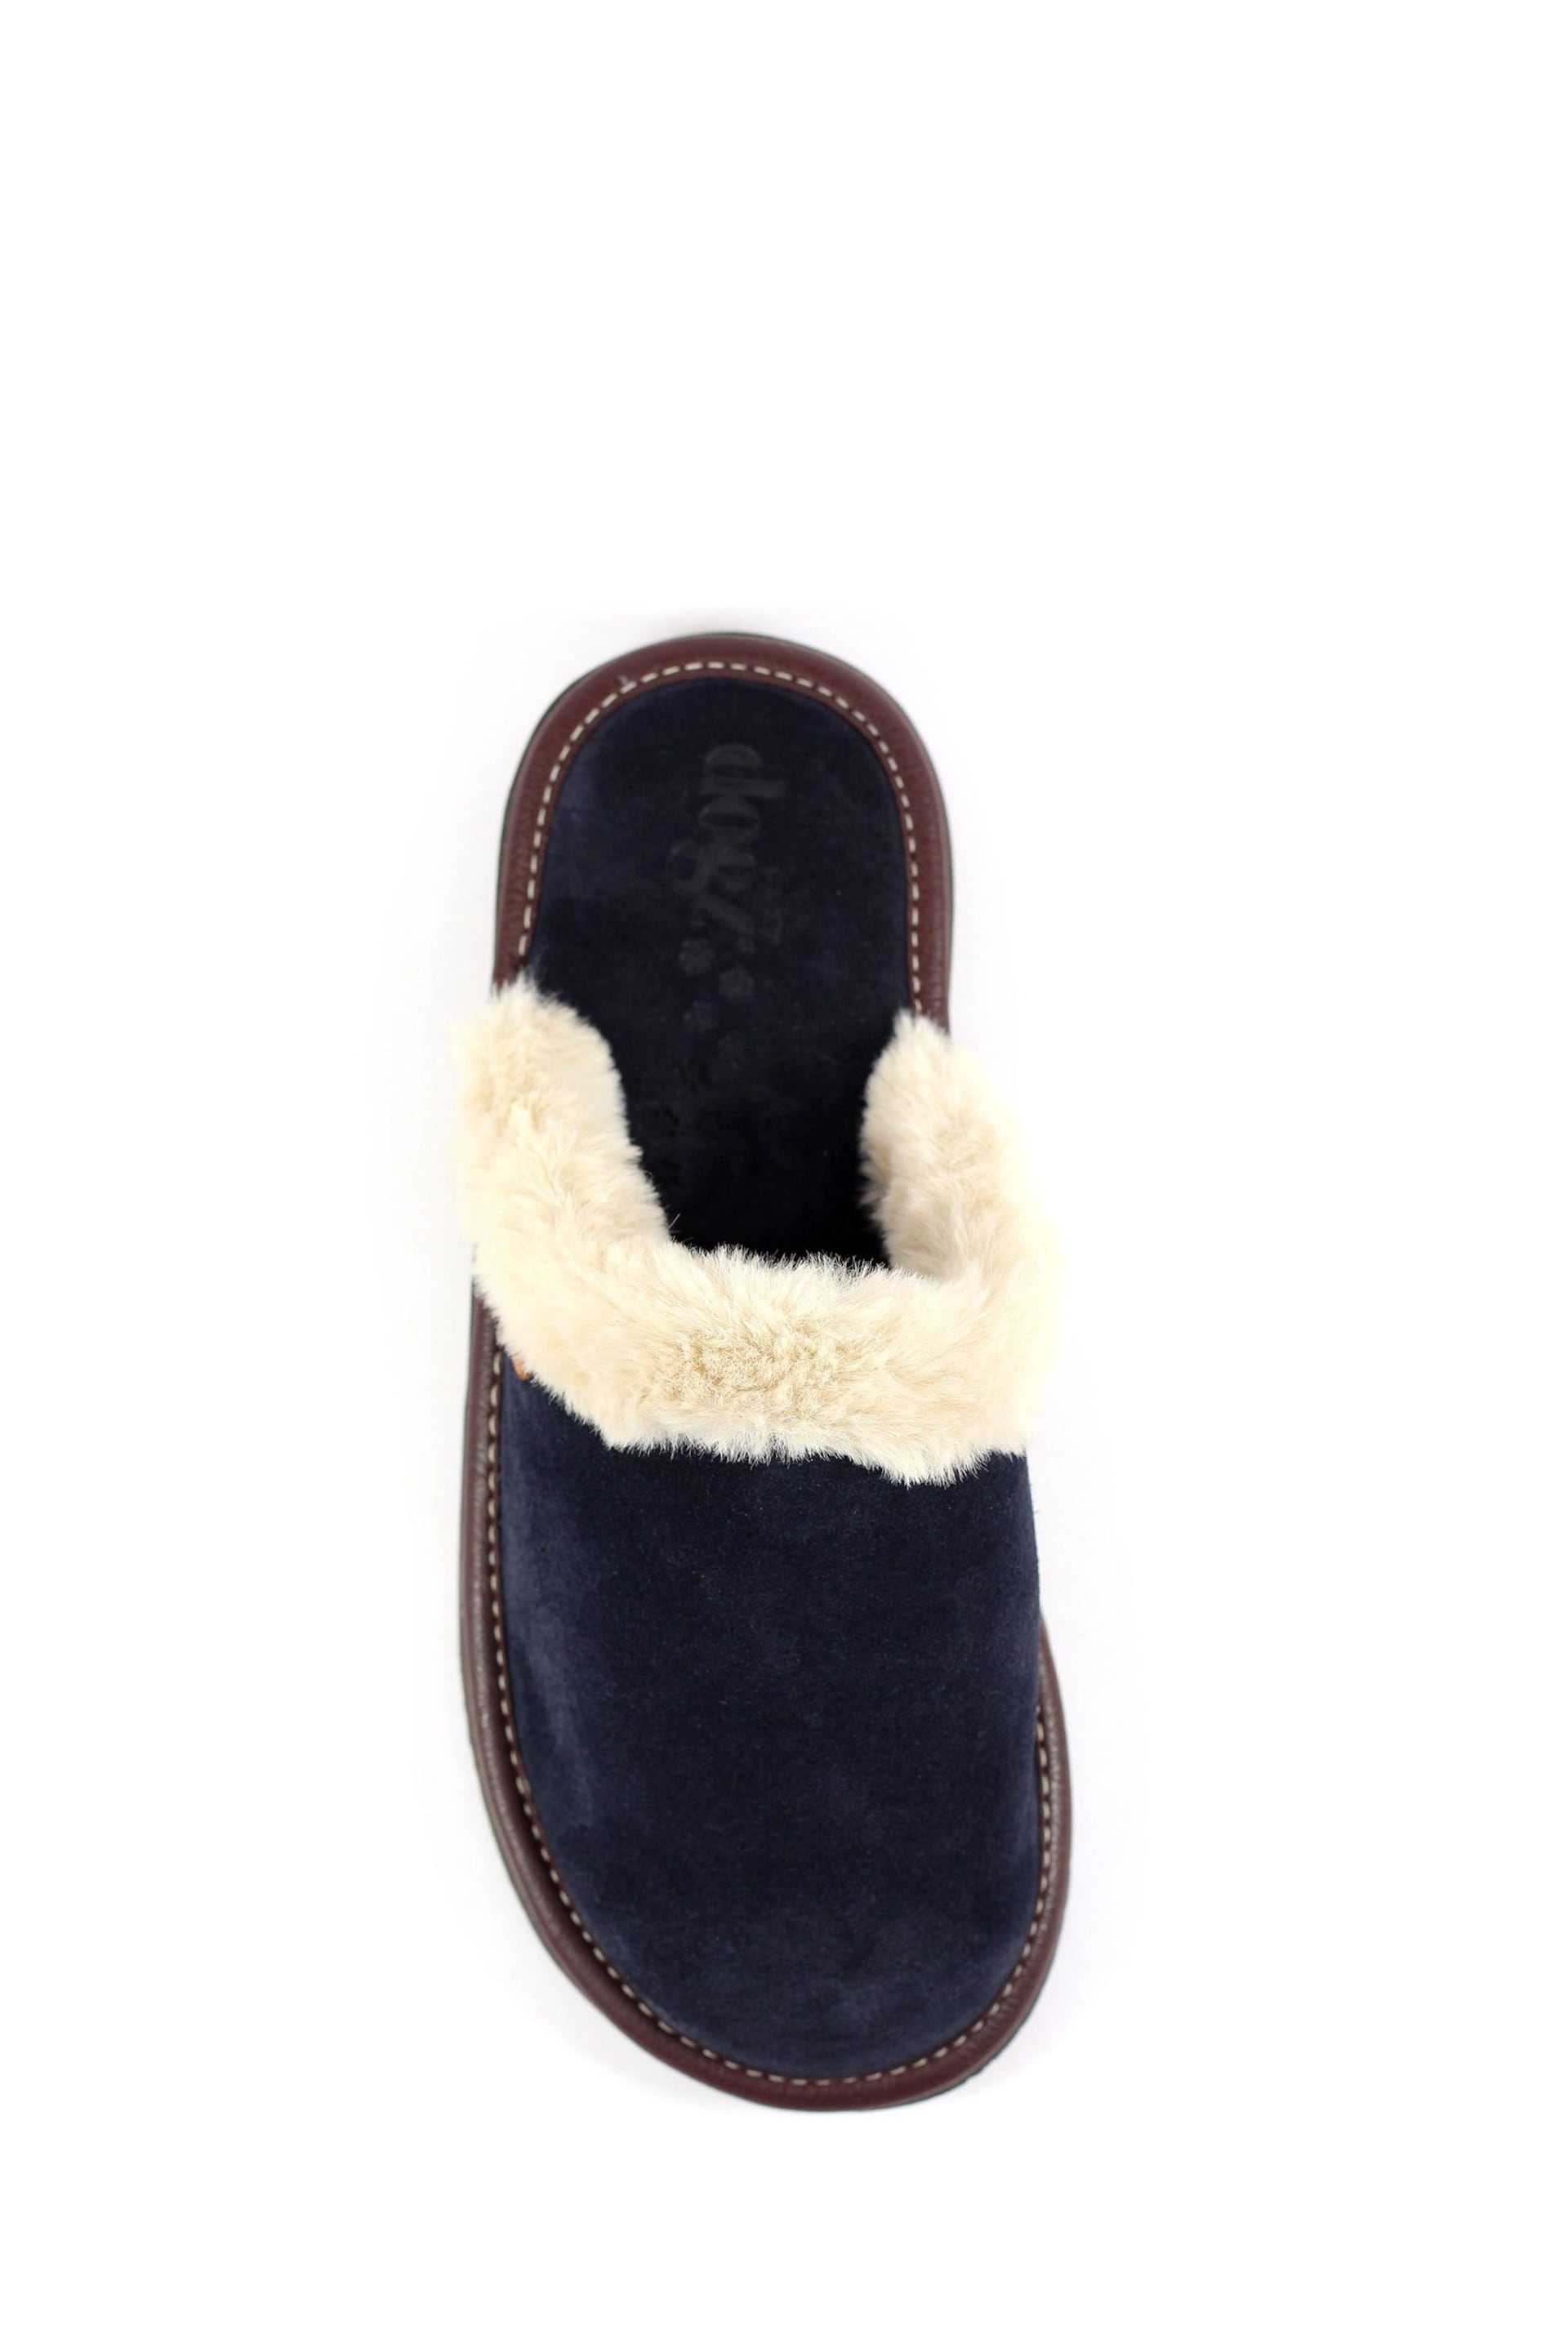 Lunar Lazy Dogz Otto Suede Mule Slippers - Image 7 of 10